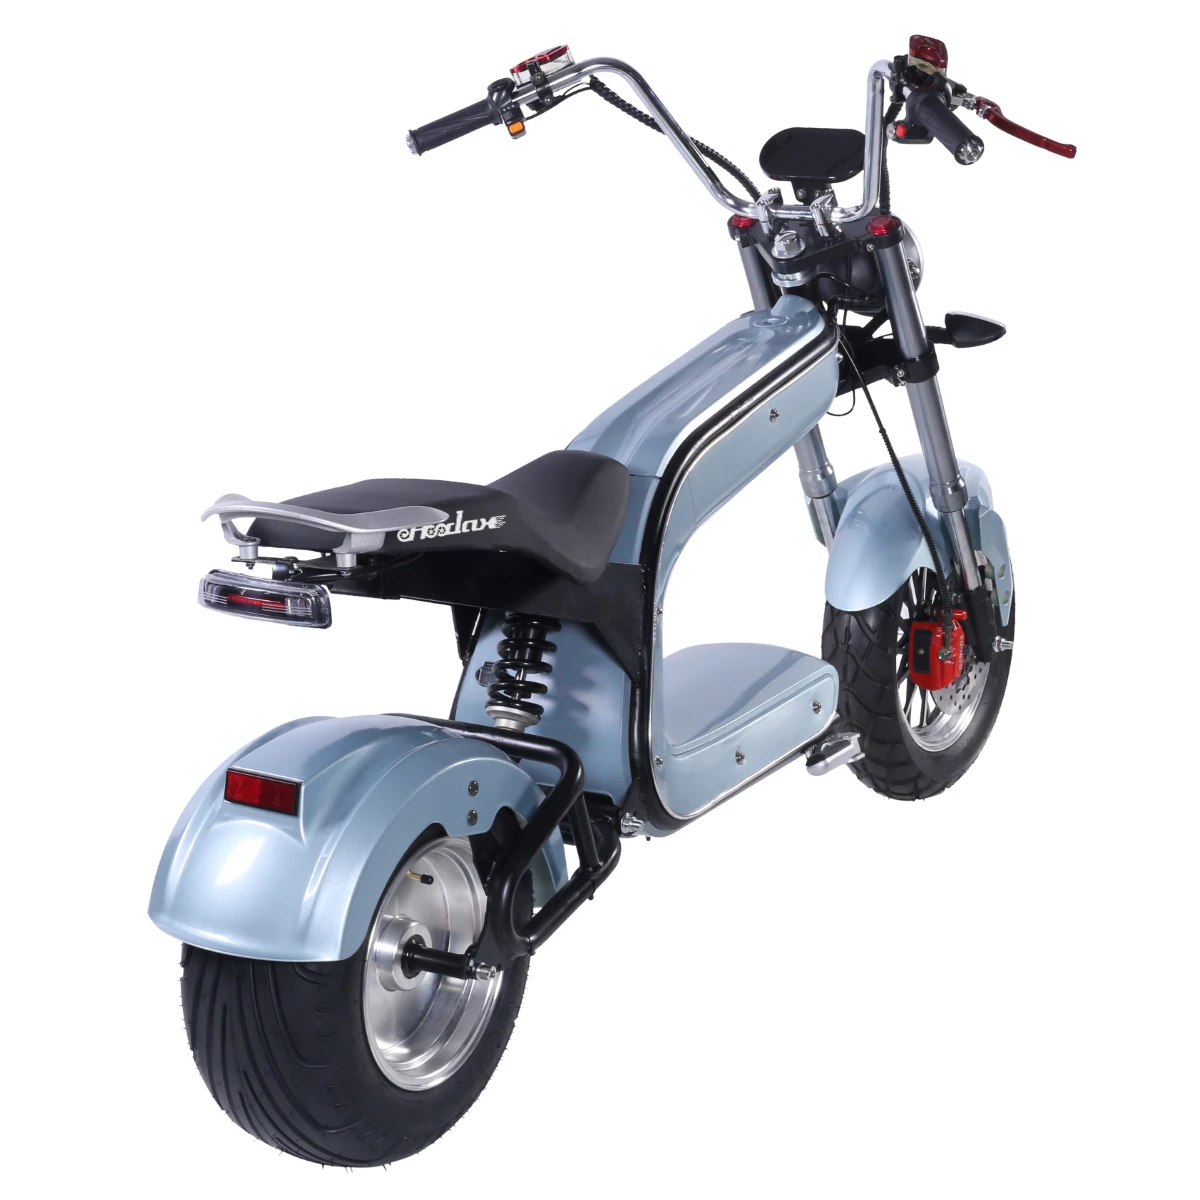 Two Wheels Big Tire Trike Adult Tricycle Citycoco 2 Wheel Electric Scooter 2000W/2500W Fat Bike Tire hot sale promotion 1000w fat tire citycoco 2 wheel adult electric scooters